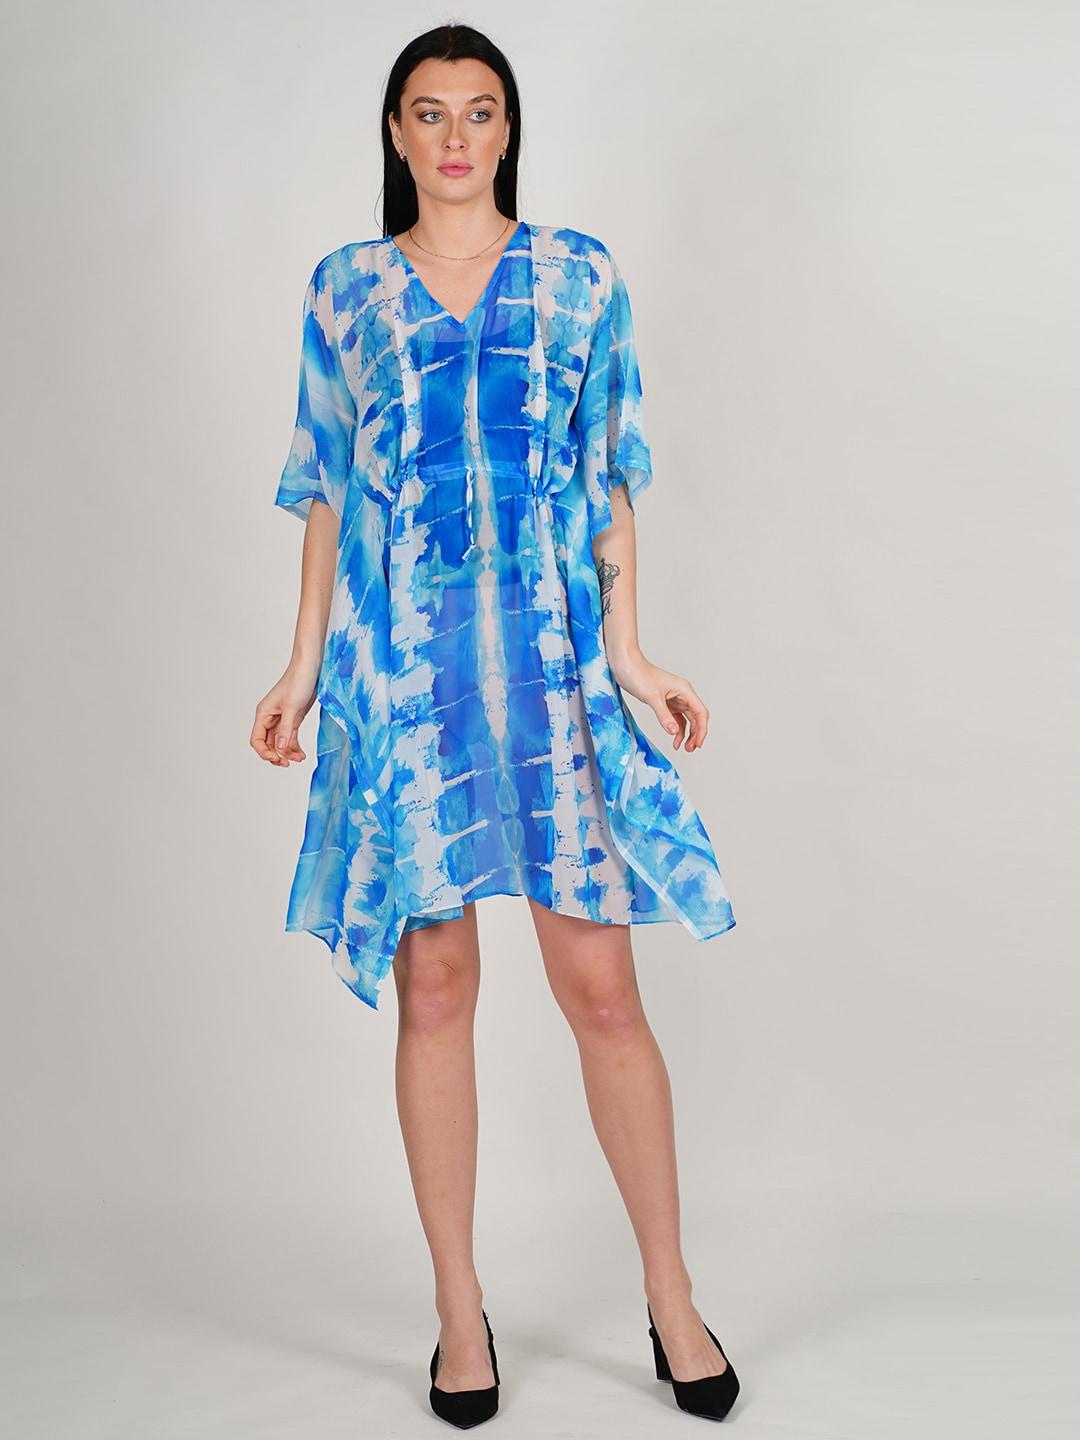 Rajoria Instyle Tie and Dye Dyed Georgette A-Line Dress